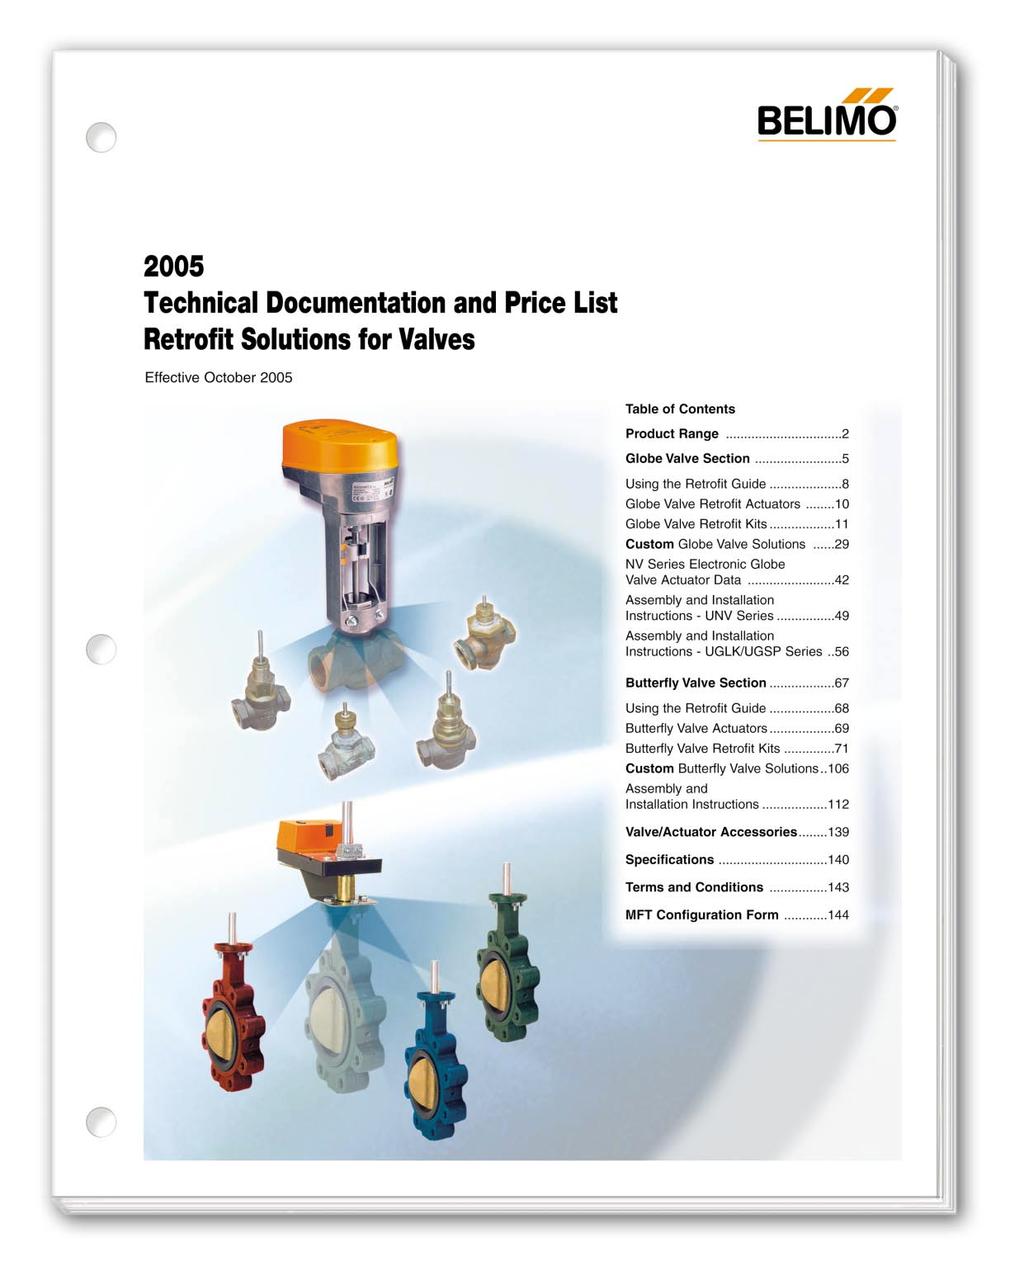 NEW Retrofit Guide Now Available! Call your Belimo Representative for a copy; or download at: www.belimo.com Belimo Aircontrols (USA), Inc. 43 Old Ridgebury Rd. 1675 East Prater Way 3151 E.